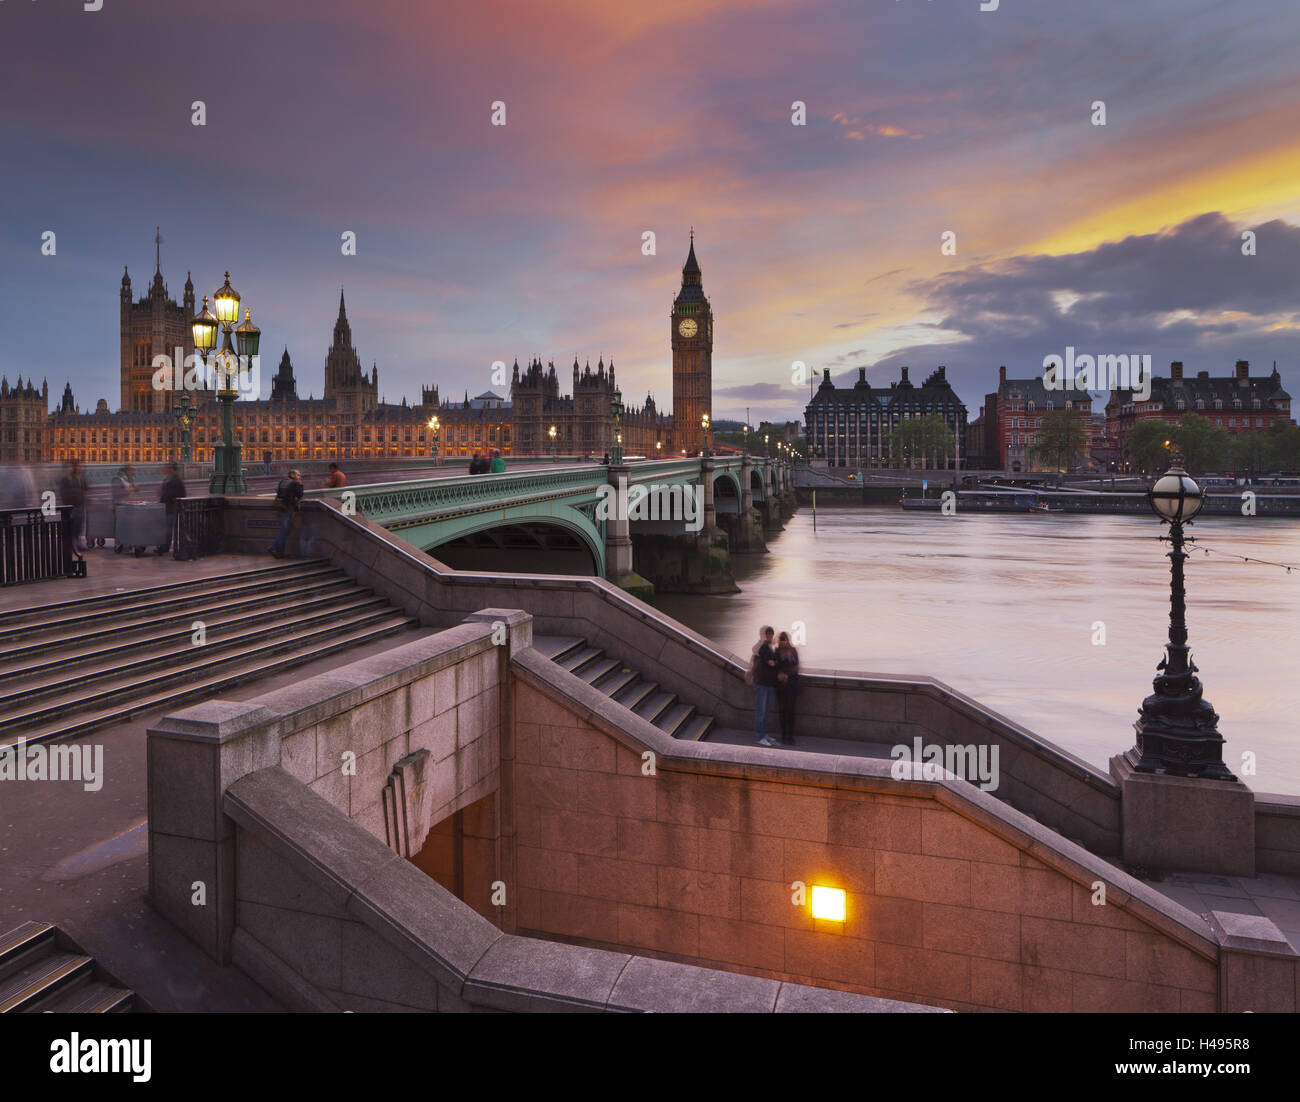 The Thames, Westminster Bridge, Westminster Palace, Big Ben, in the evening, London, England, Great Britain, Stock Photo